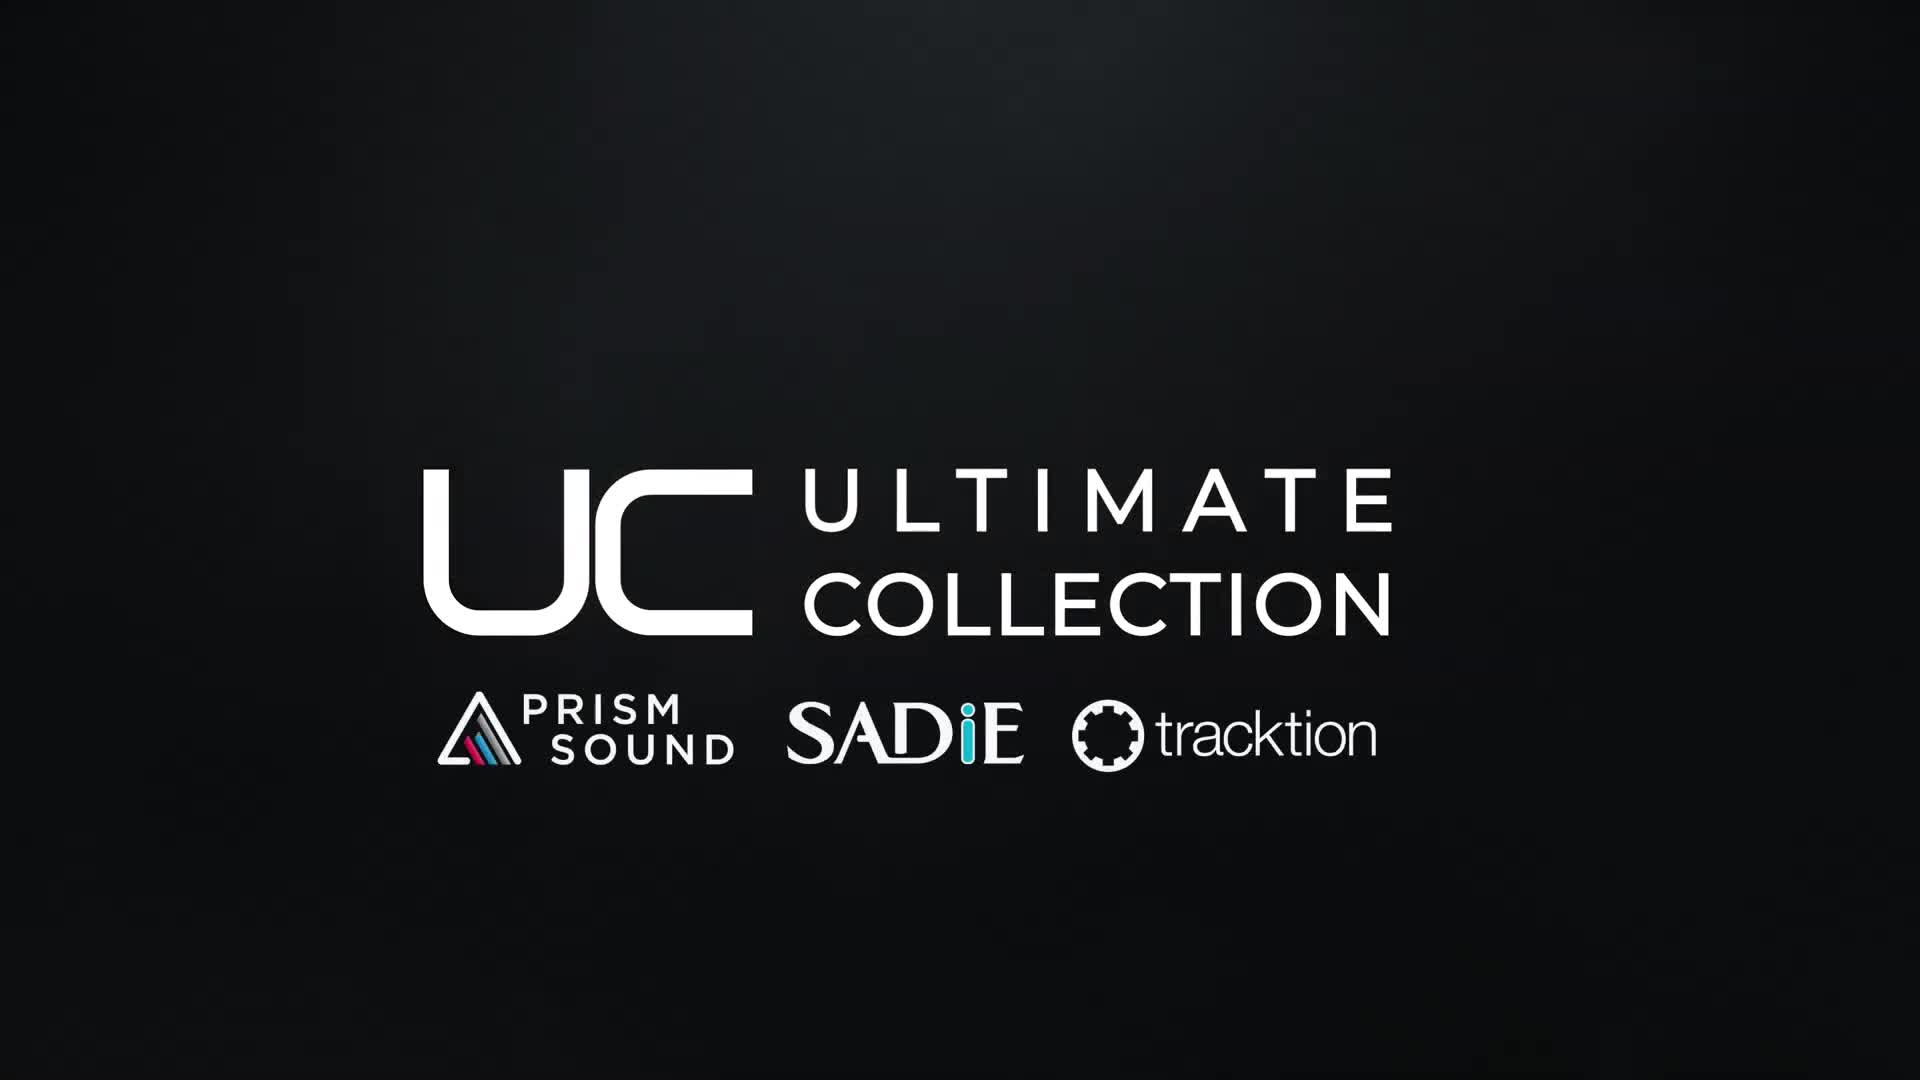 Welcome to our Prism Sound Ultimate Collection Quickstart Guide